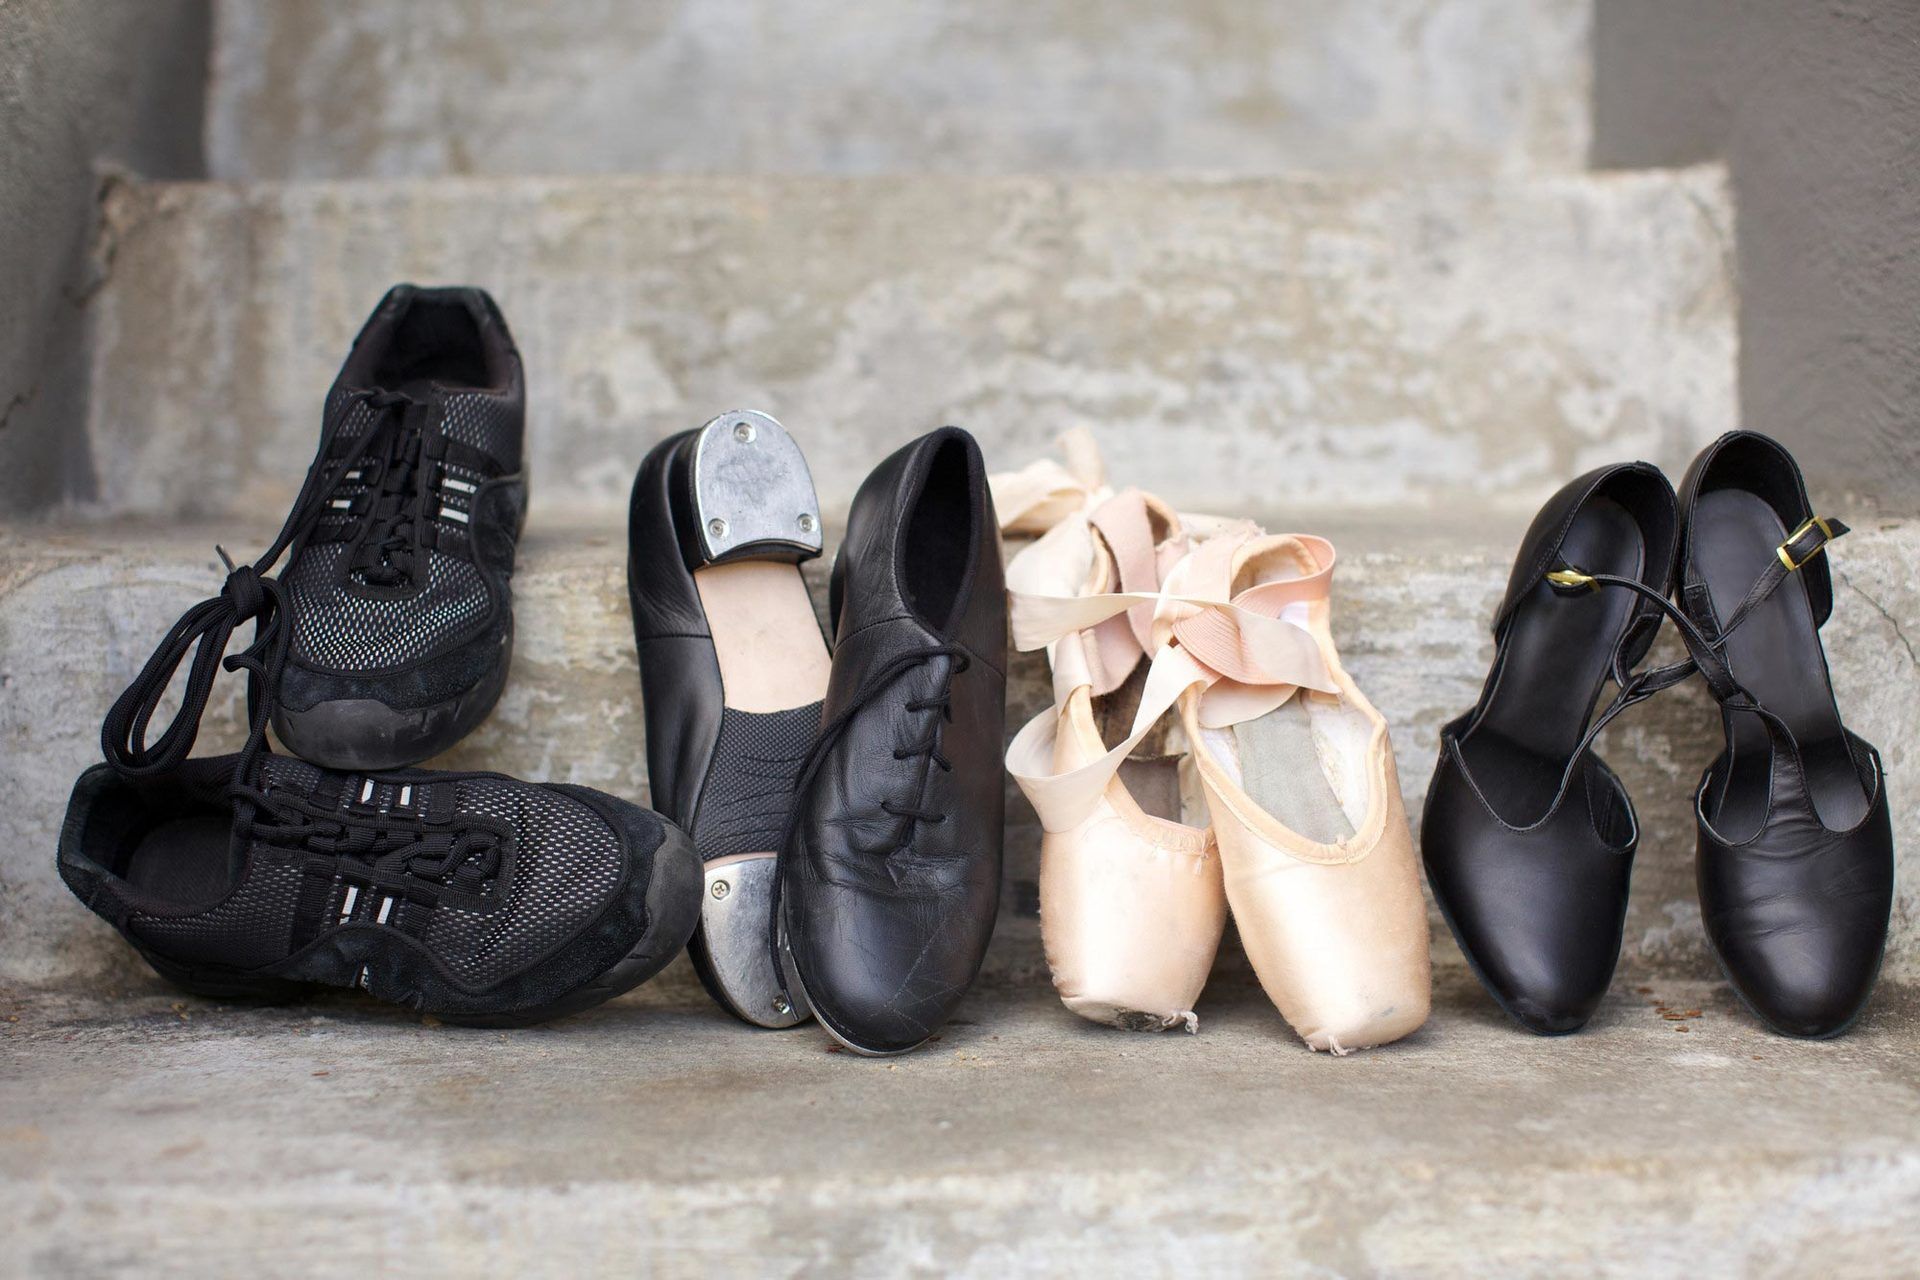 Special Offers On Dancewear & Shoes